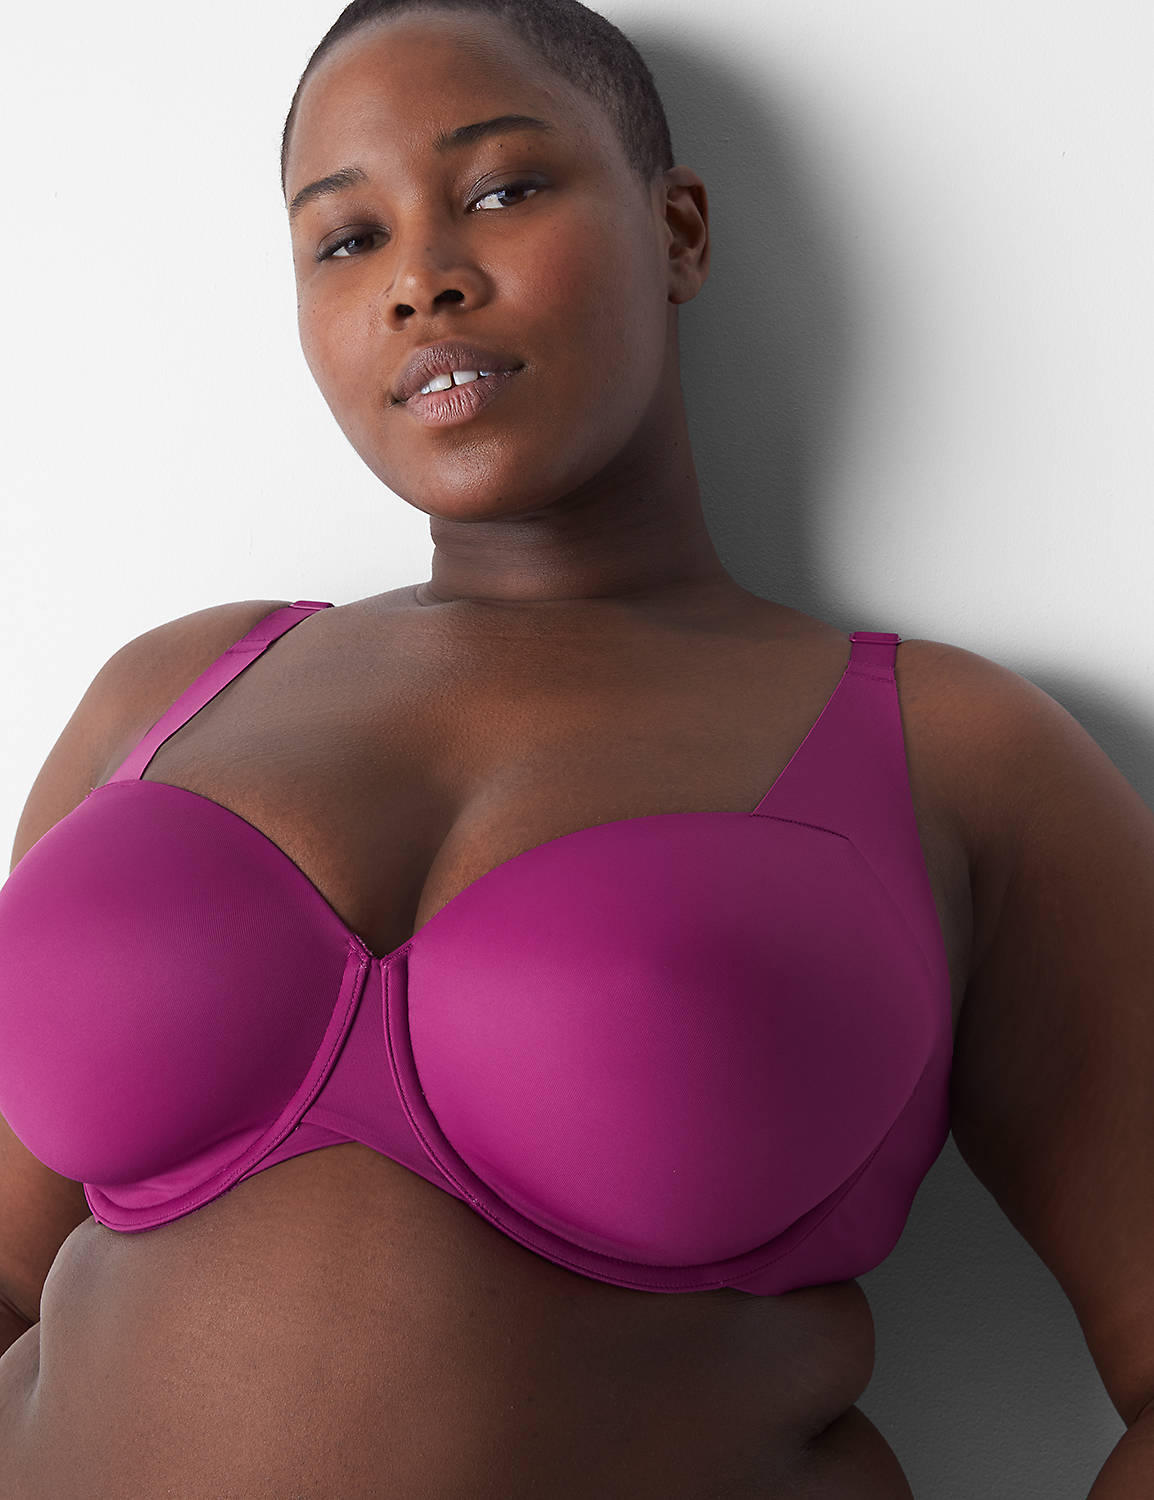 Cacique Lane Bryant Smooth Lightly Lined Balconette Bra 44DD